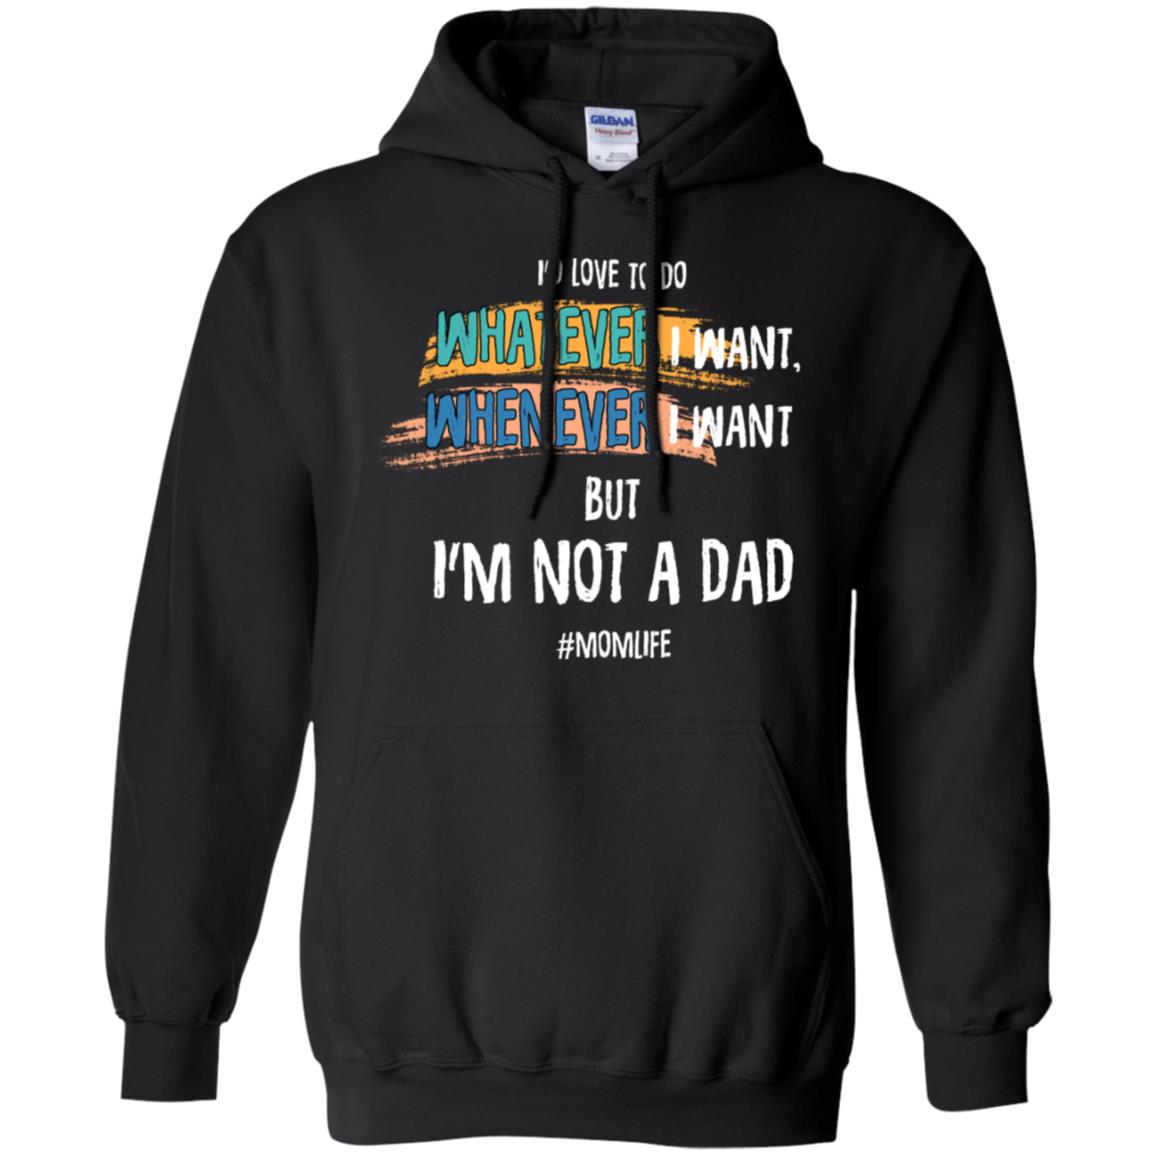 I'd Love To Do Whatever I Want Whenever I Want But I'm Not A Dad #momlife ShirtG185 Gildan Pullover Hoodie 8 oz.